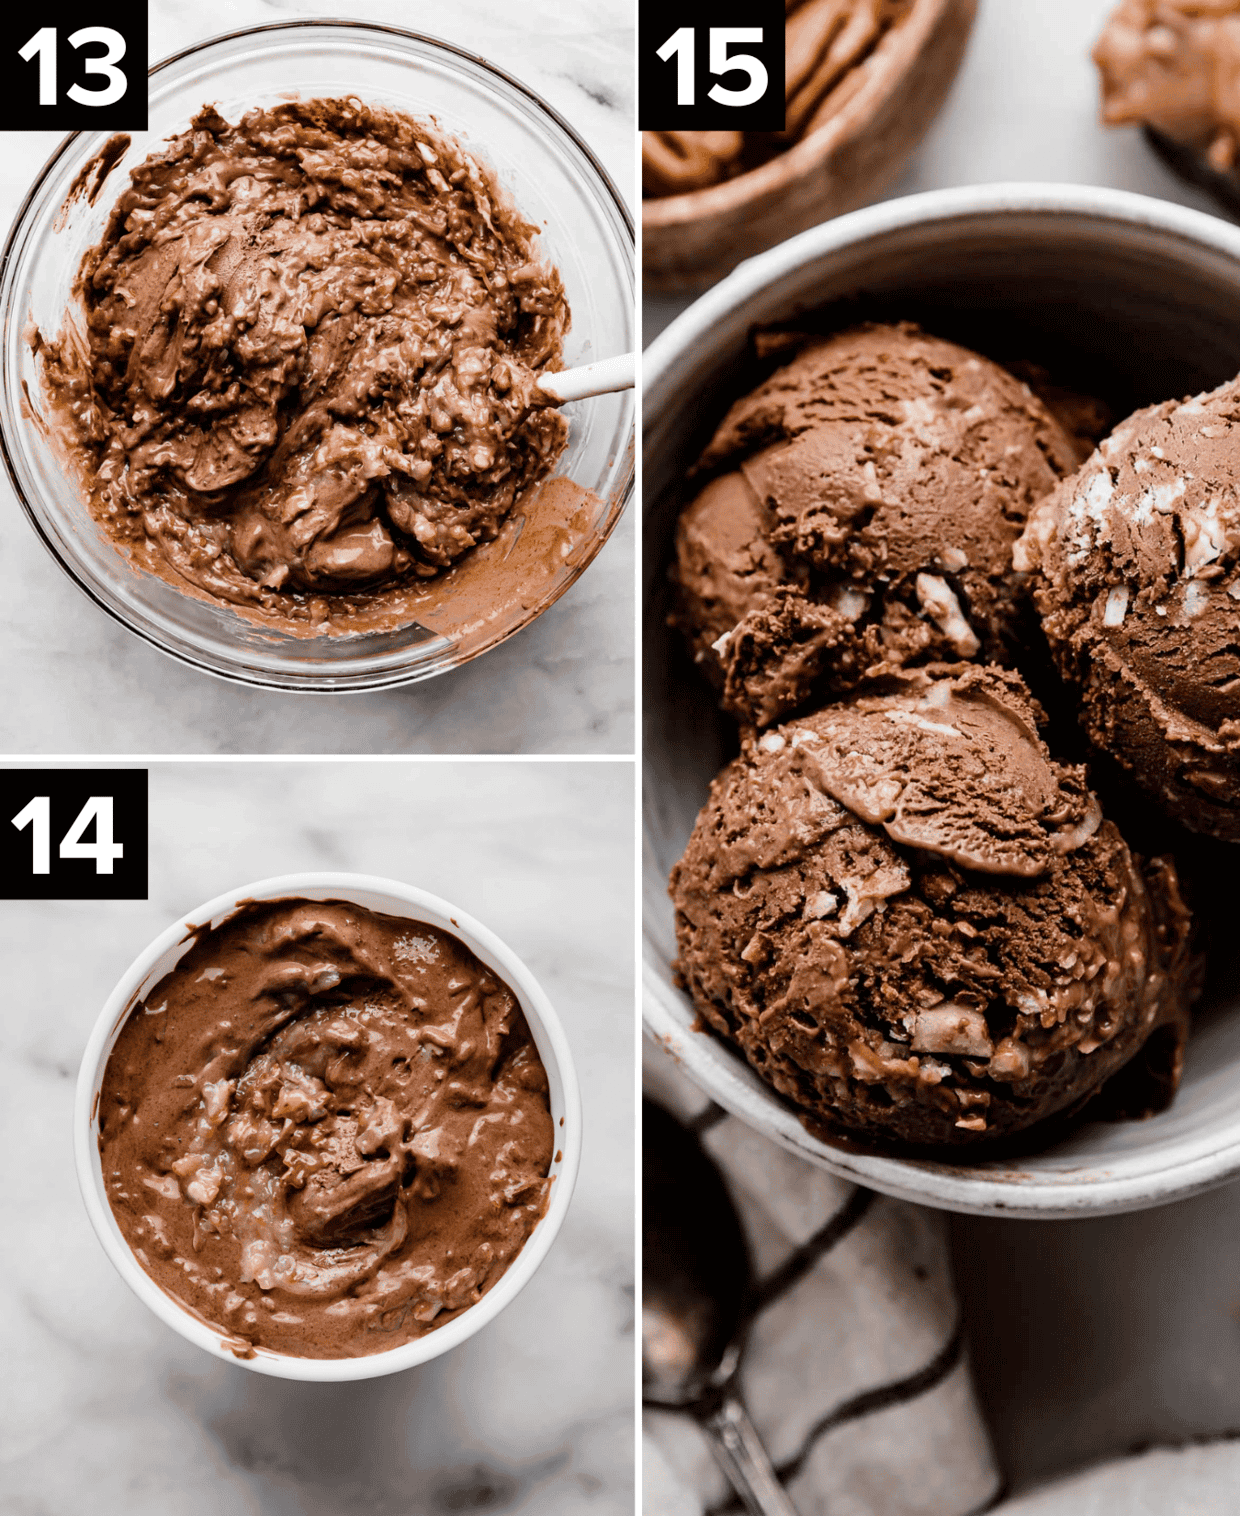 Three photos, top left is coconut pecan frosting stirred into chocolate ice cream, bottom left photo is German Chocolate Ice Cream in a white round freezer container, right photo is round scoops of German Chocolate Ice Cream in a white bowl.